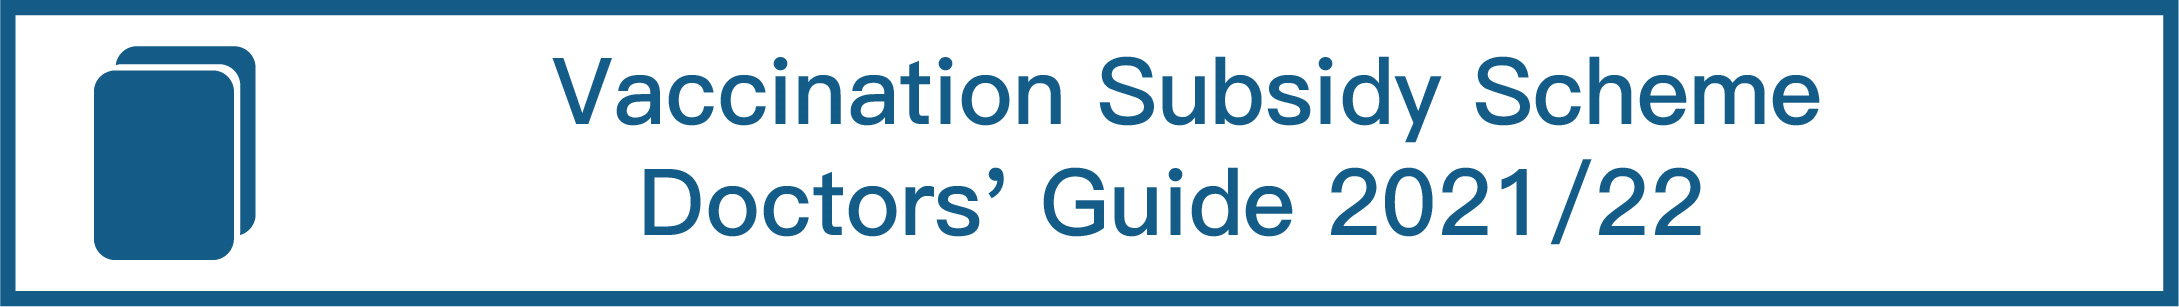 Vaccination Subsidy Scheme Doctors' Guide 2021/22